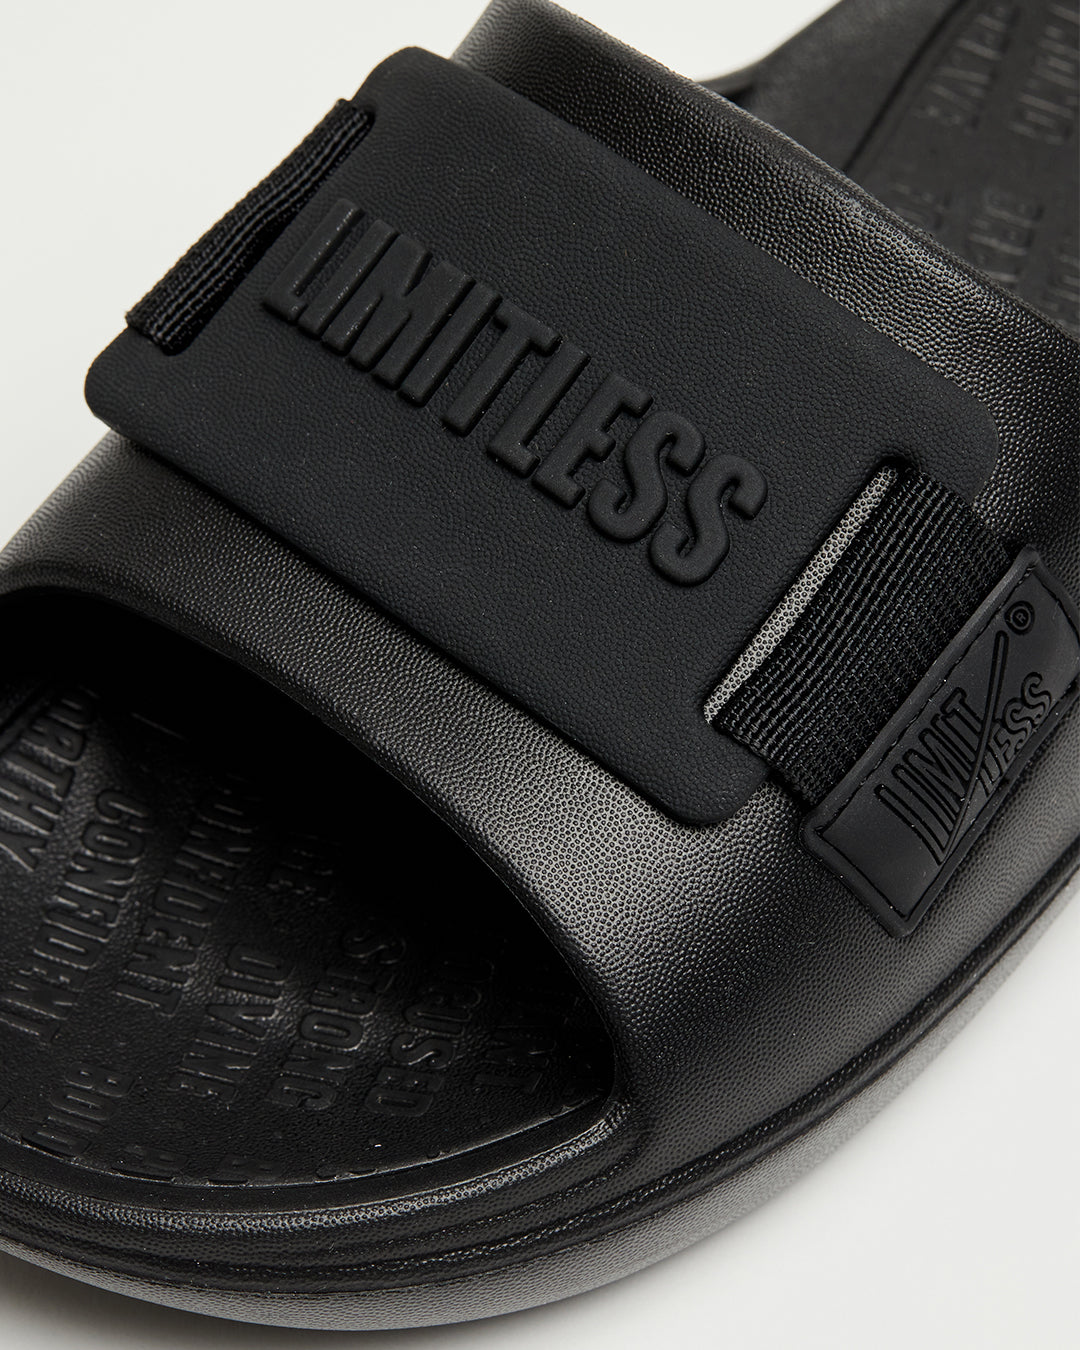 LIMITLESS SLIDES™ WITH ESSENTIAL TIBAH™ QUAD - LAFAYETTE HIGH SCHOOL EDITION